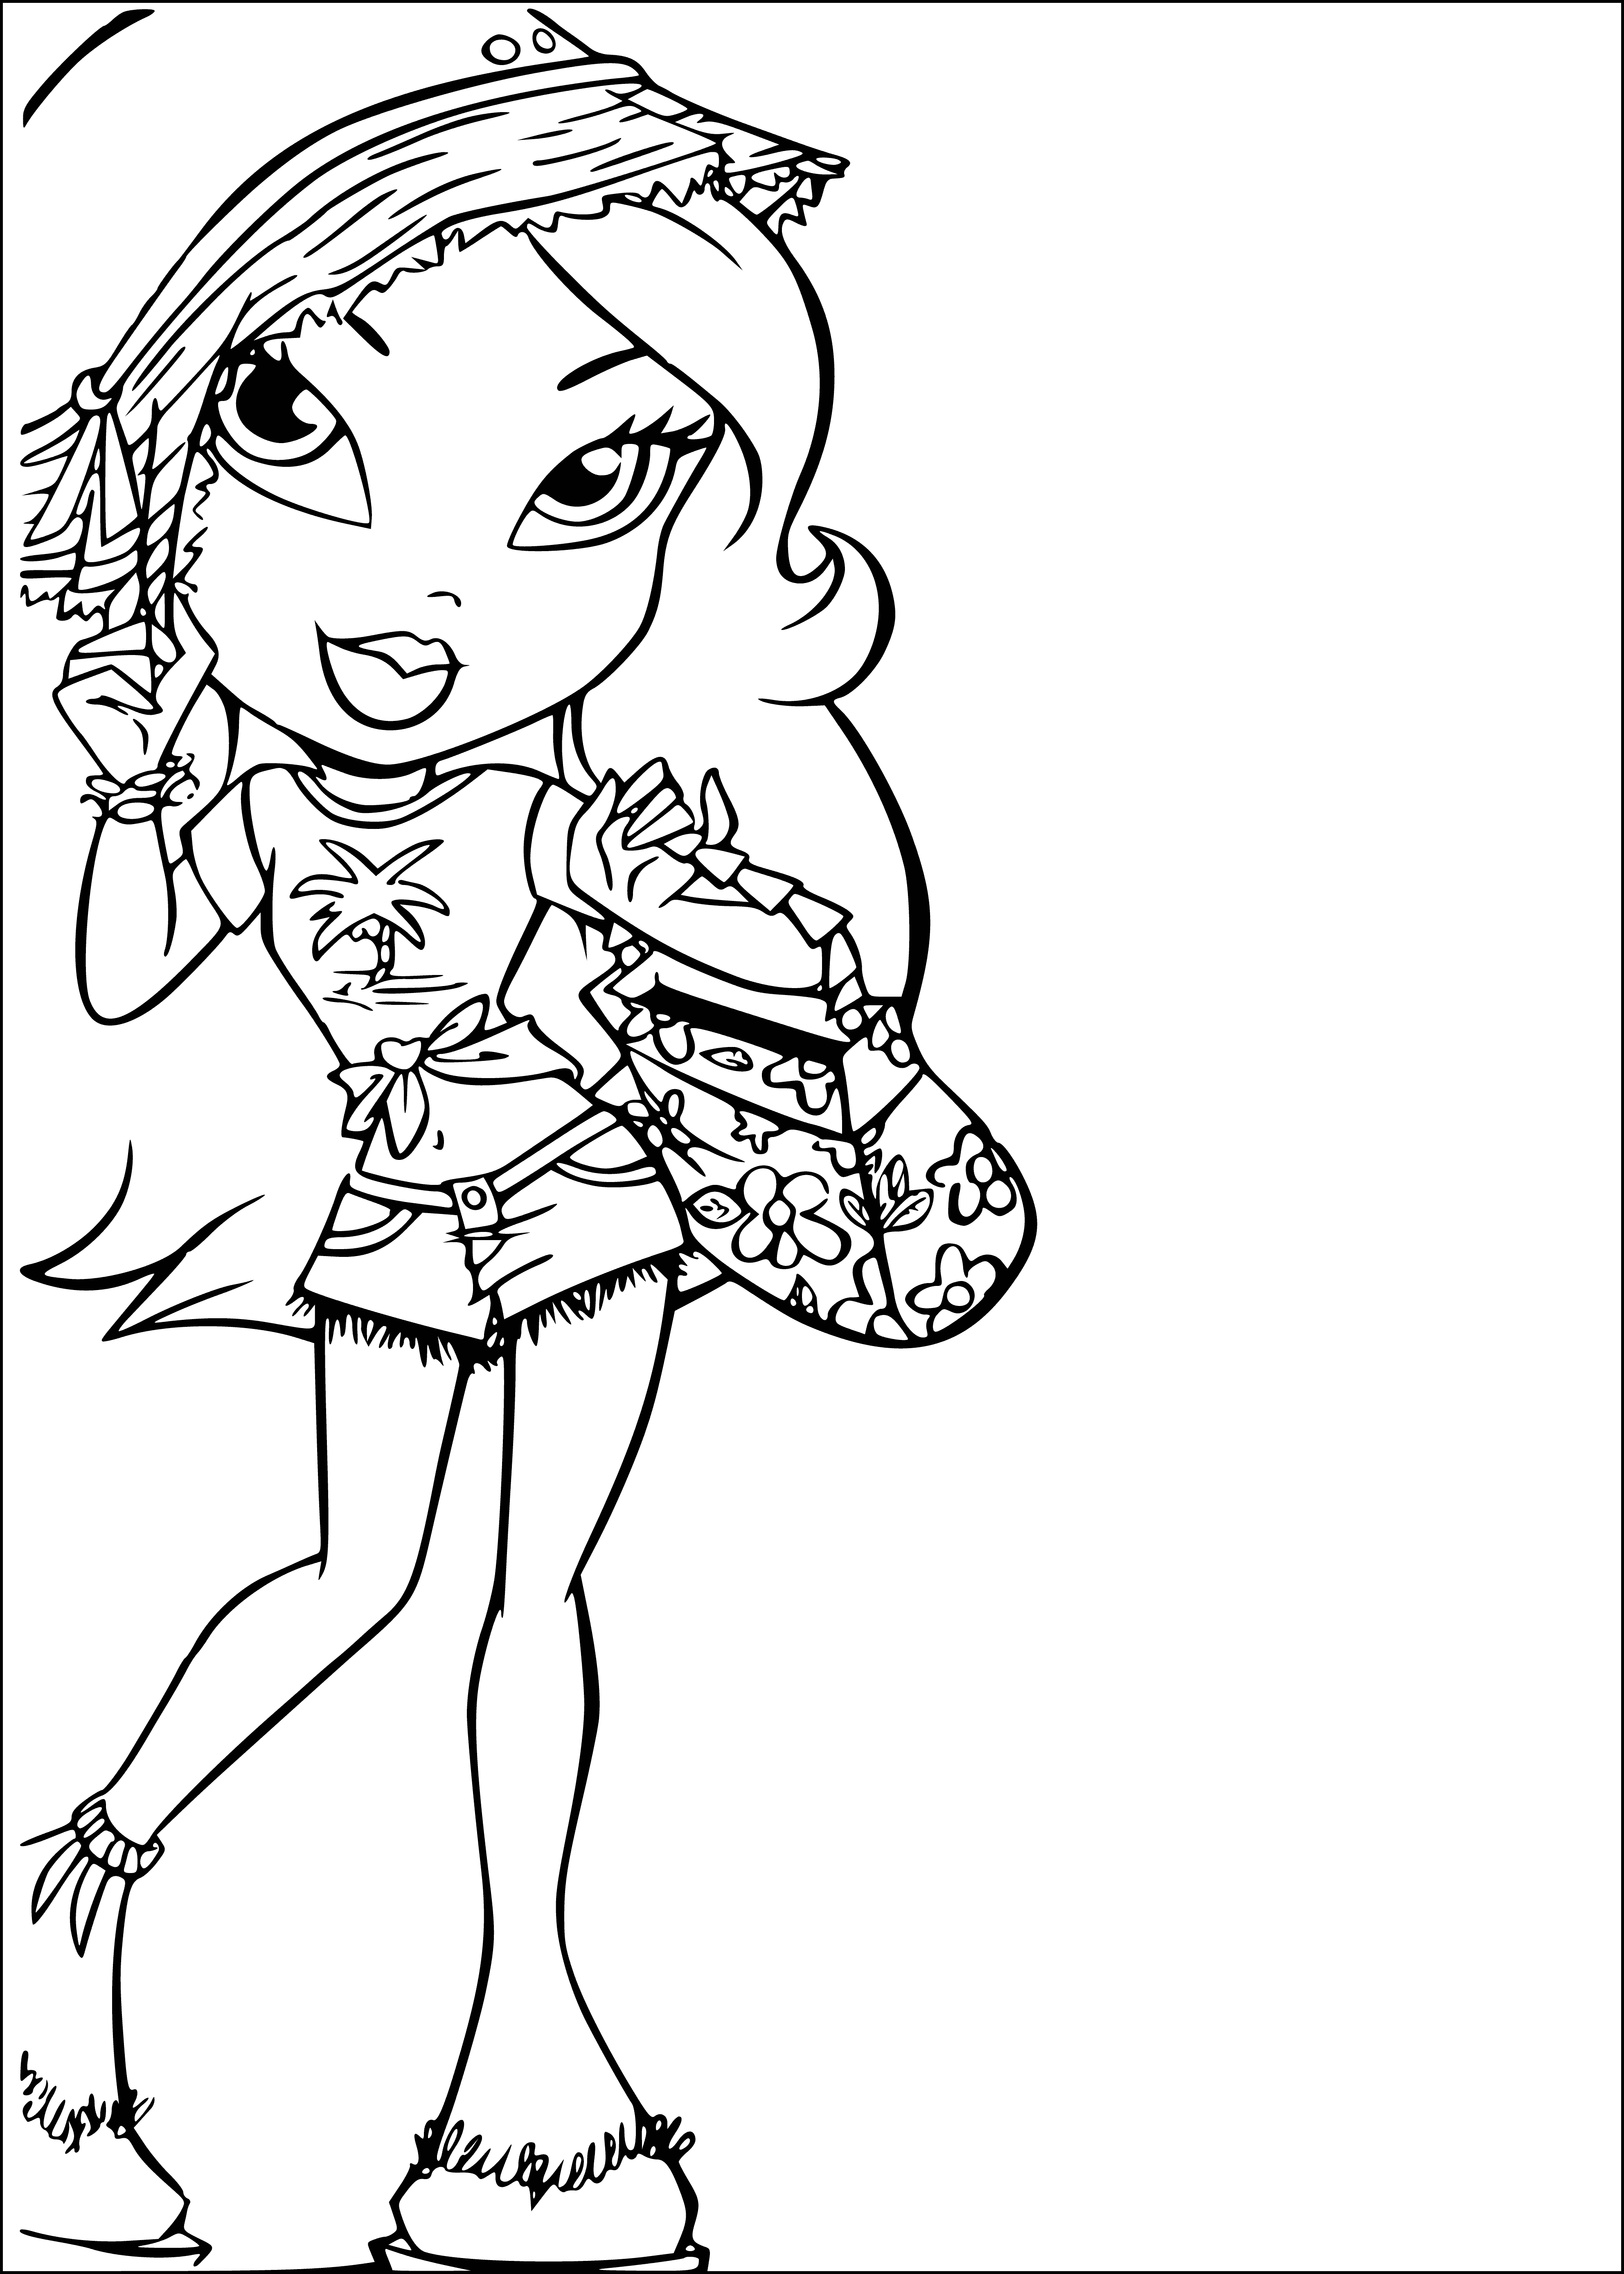 coloring page: Girl in coloring page holds a Bratz doll. She wears pink and hearts, two braids, and a bracelet.